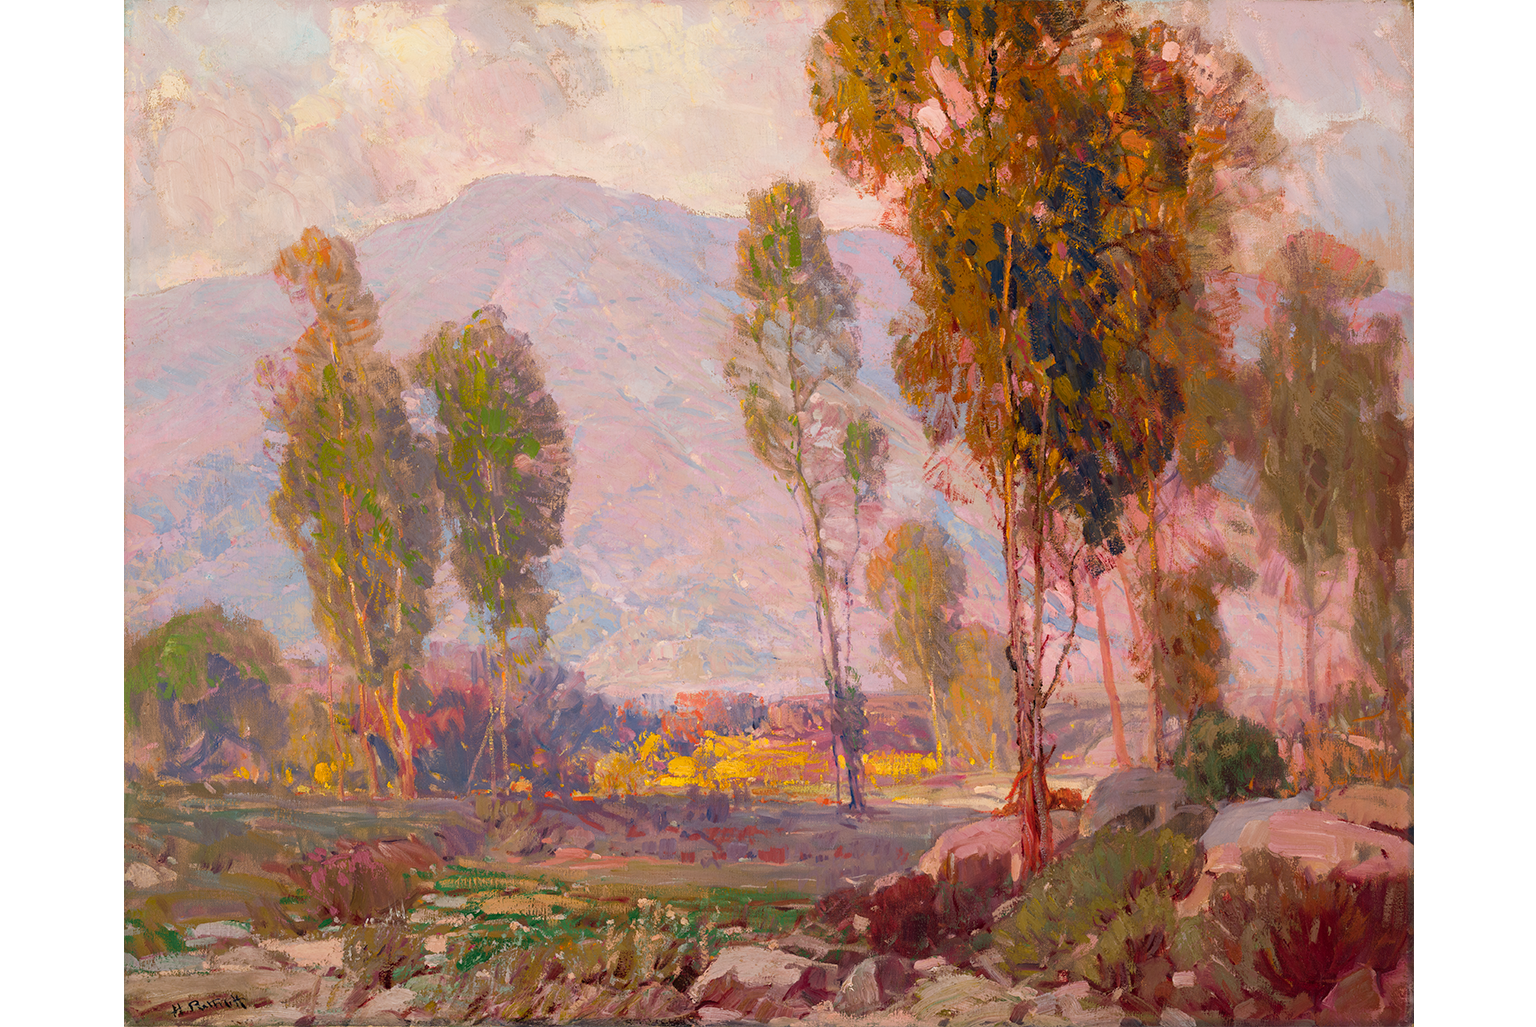 Hanson Duvall Puthuff, Verdugo Canyon, after 1926, Oil on canvas, 32 x 40 in. UCI Jack and Shanaz Langson Institute and Museum of California Art, Gift of The Irvine Museum